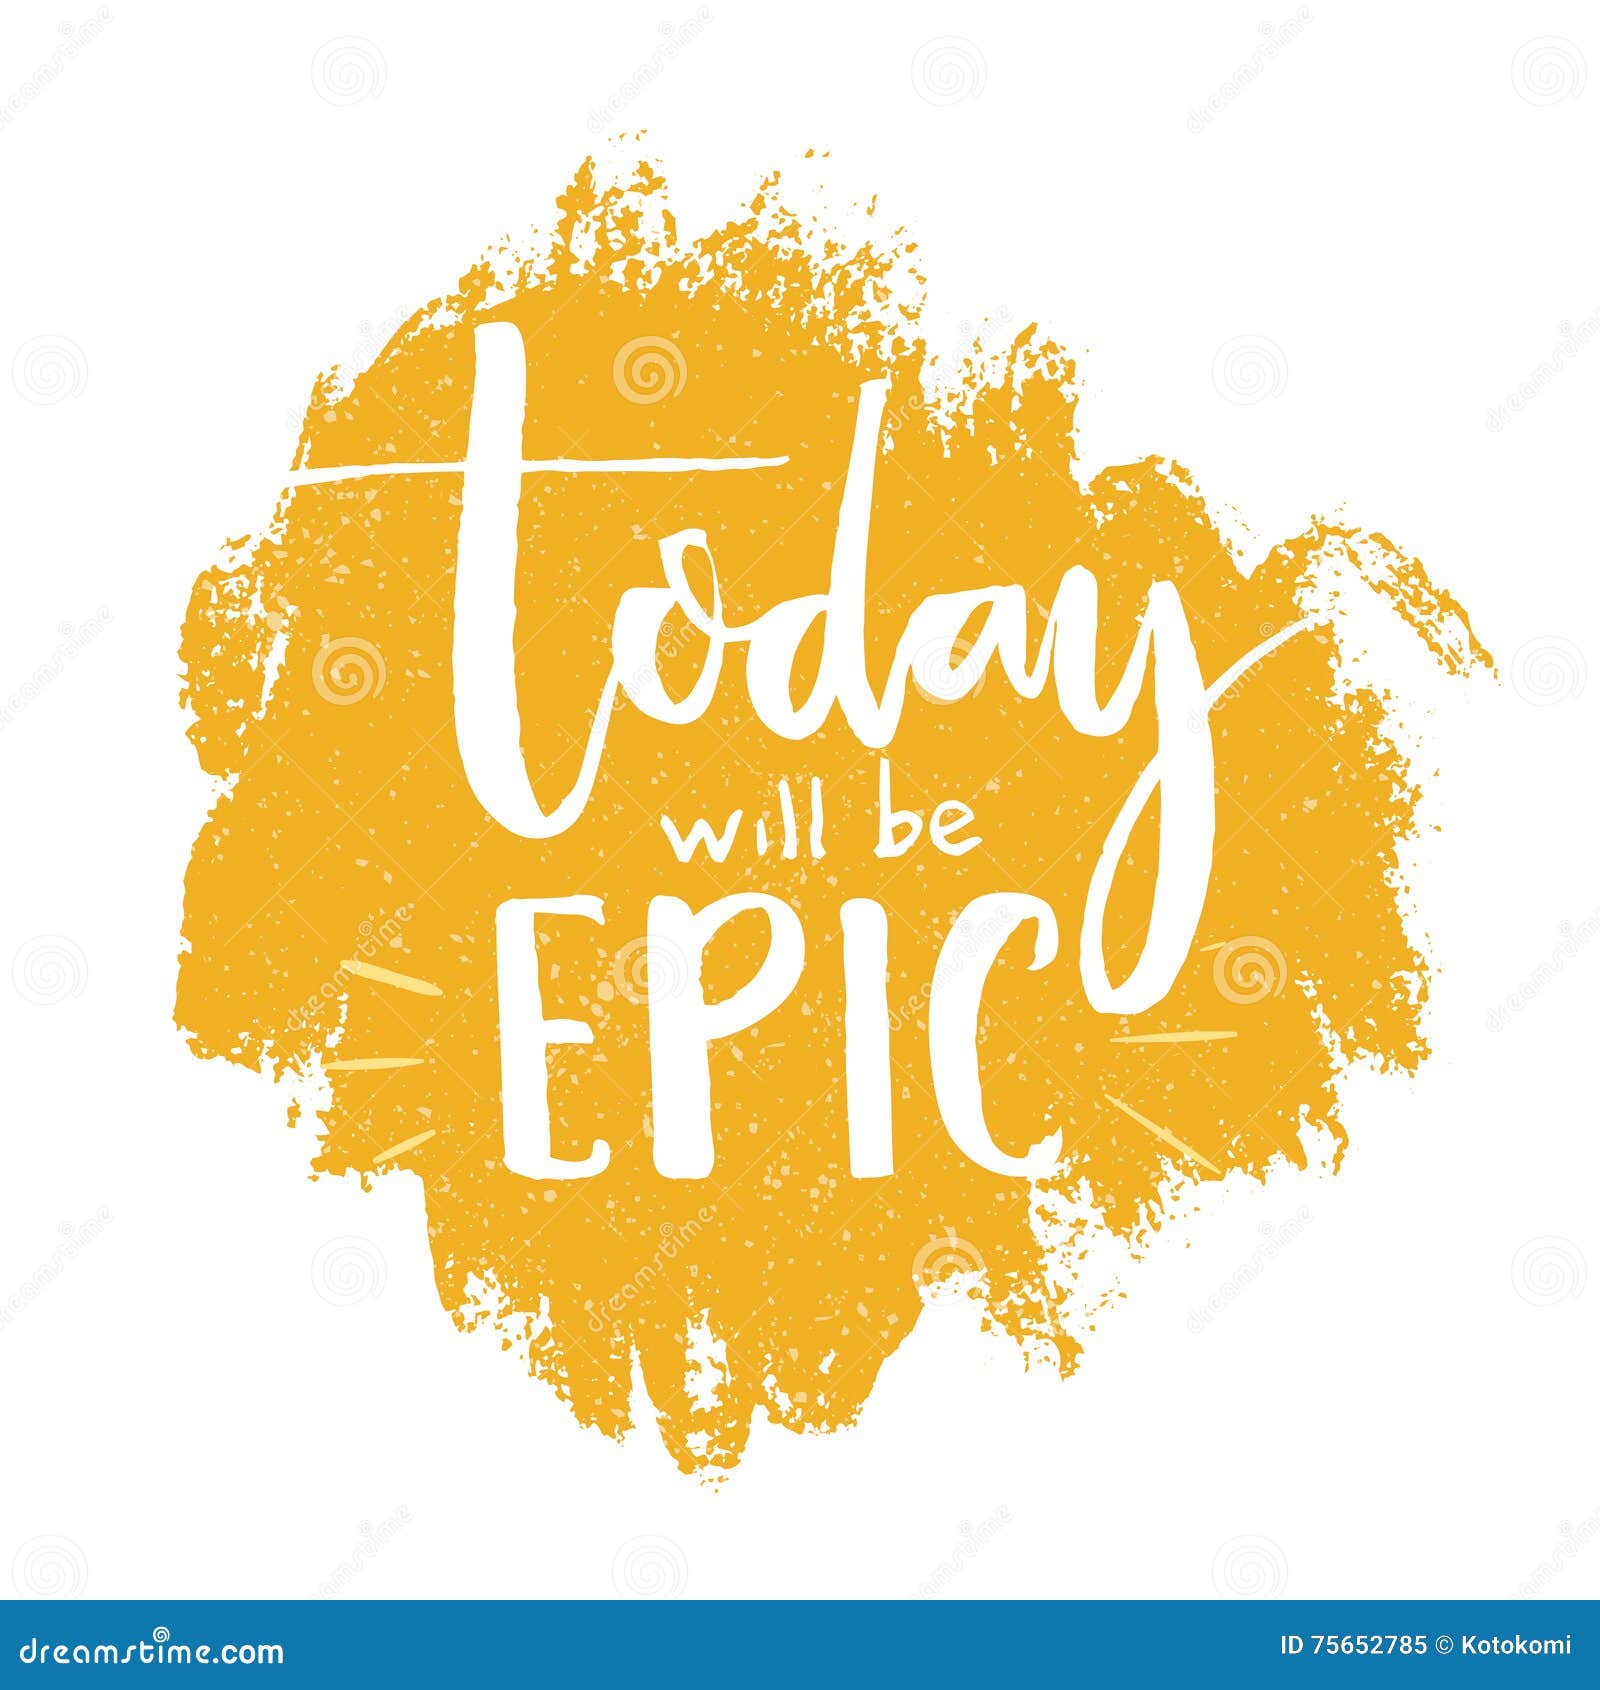 today will be epic. inspirational quote poster, brush lettering at orange background